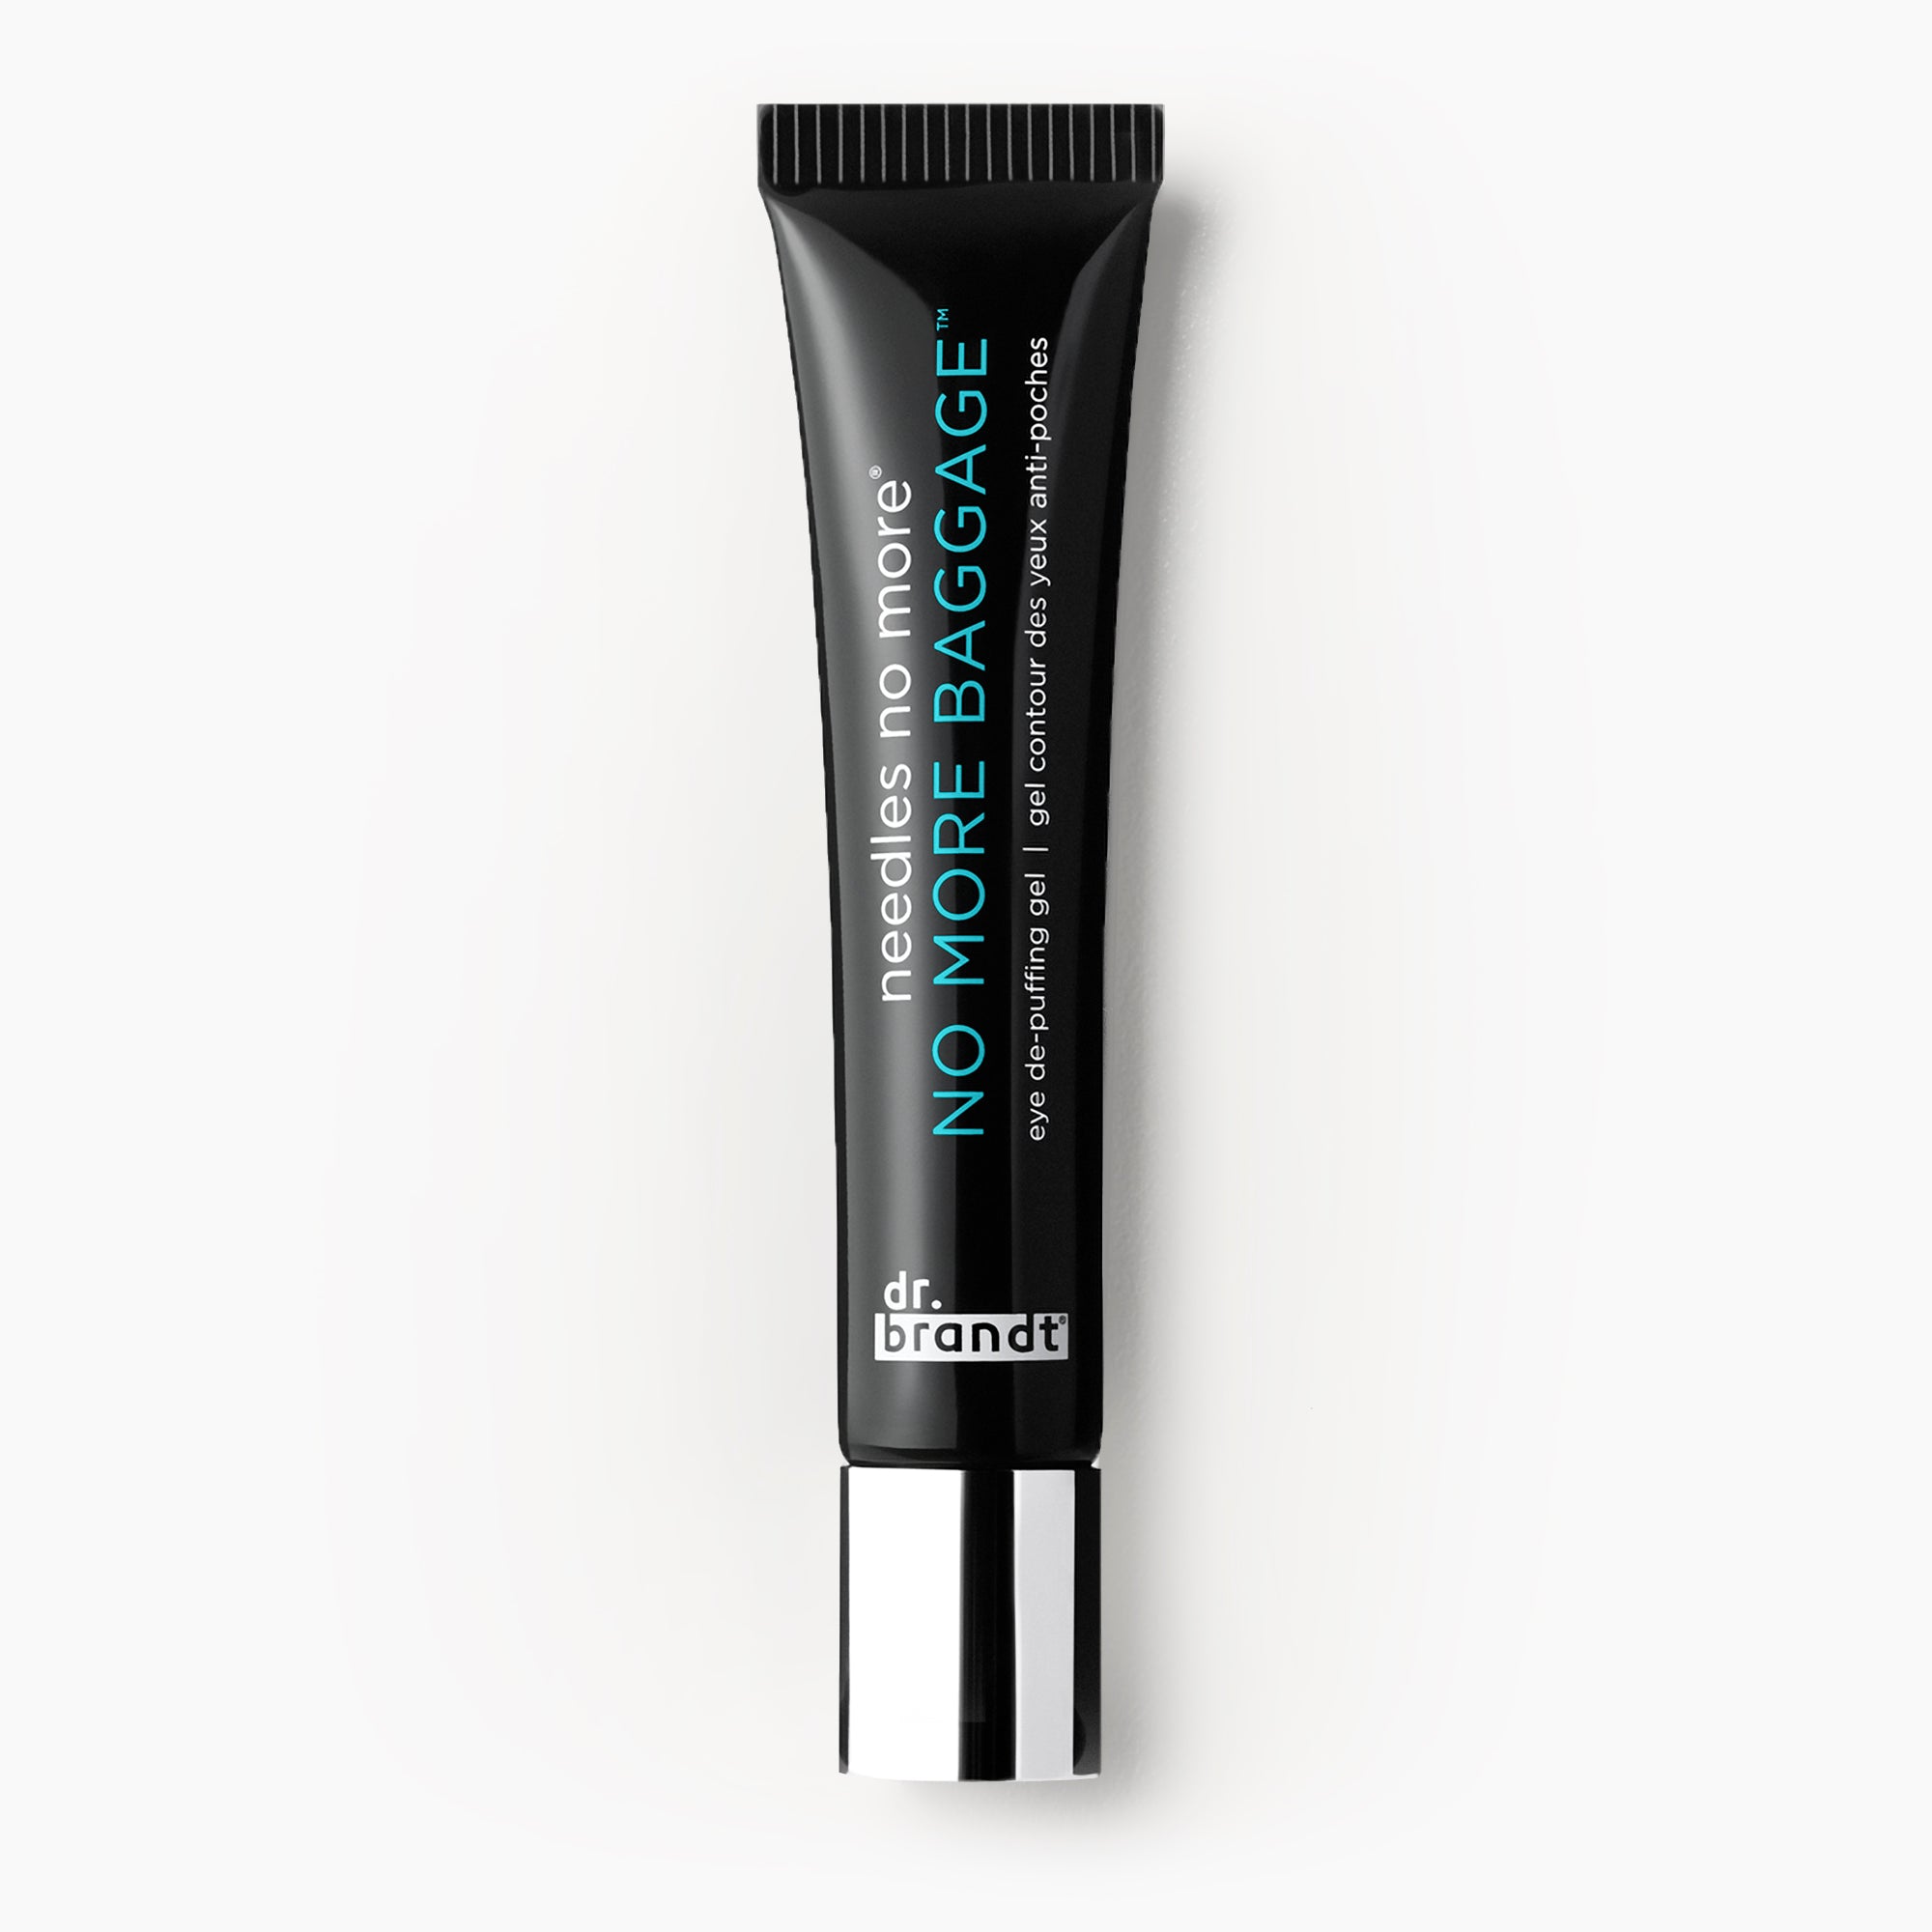  Dr. Brandt Needles No More Wrinkle Smoothing Cream - Smooths  Expression Lines